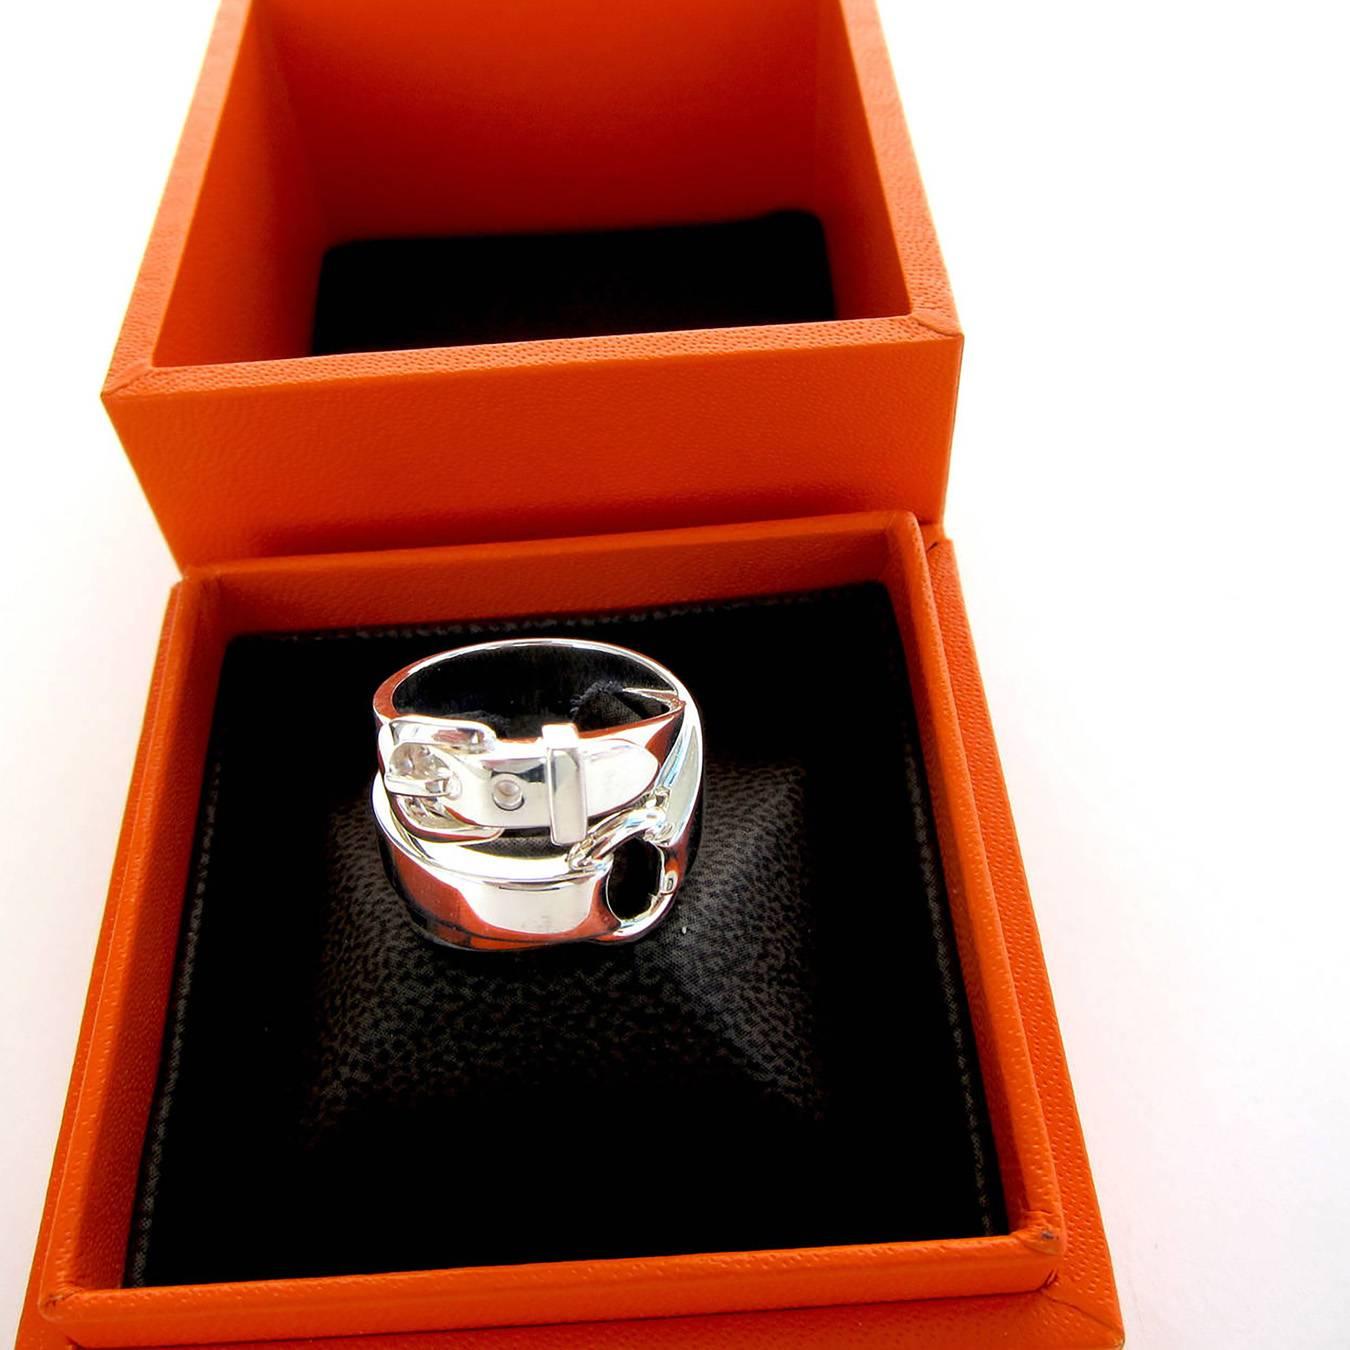 Brand New. Full set with Hermes jewelry box and ribbon. 
BELOW RETAIL (currently $1,023 including tax where we are).
Amazing statement ring from Hermes
Debridee is a fabulous and coveted silver ring for everyday and special occasion wear
AG925